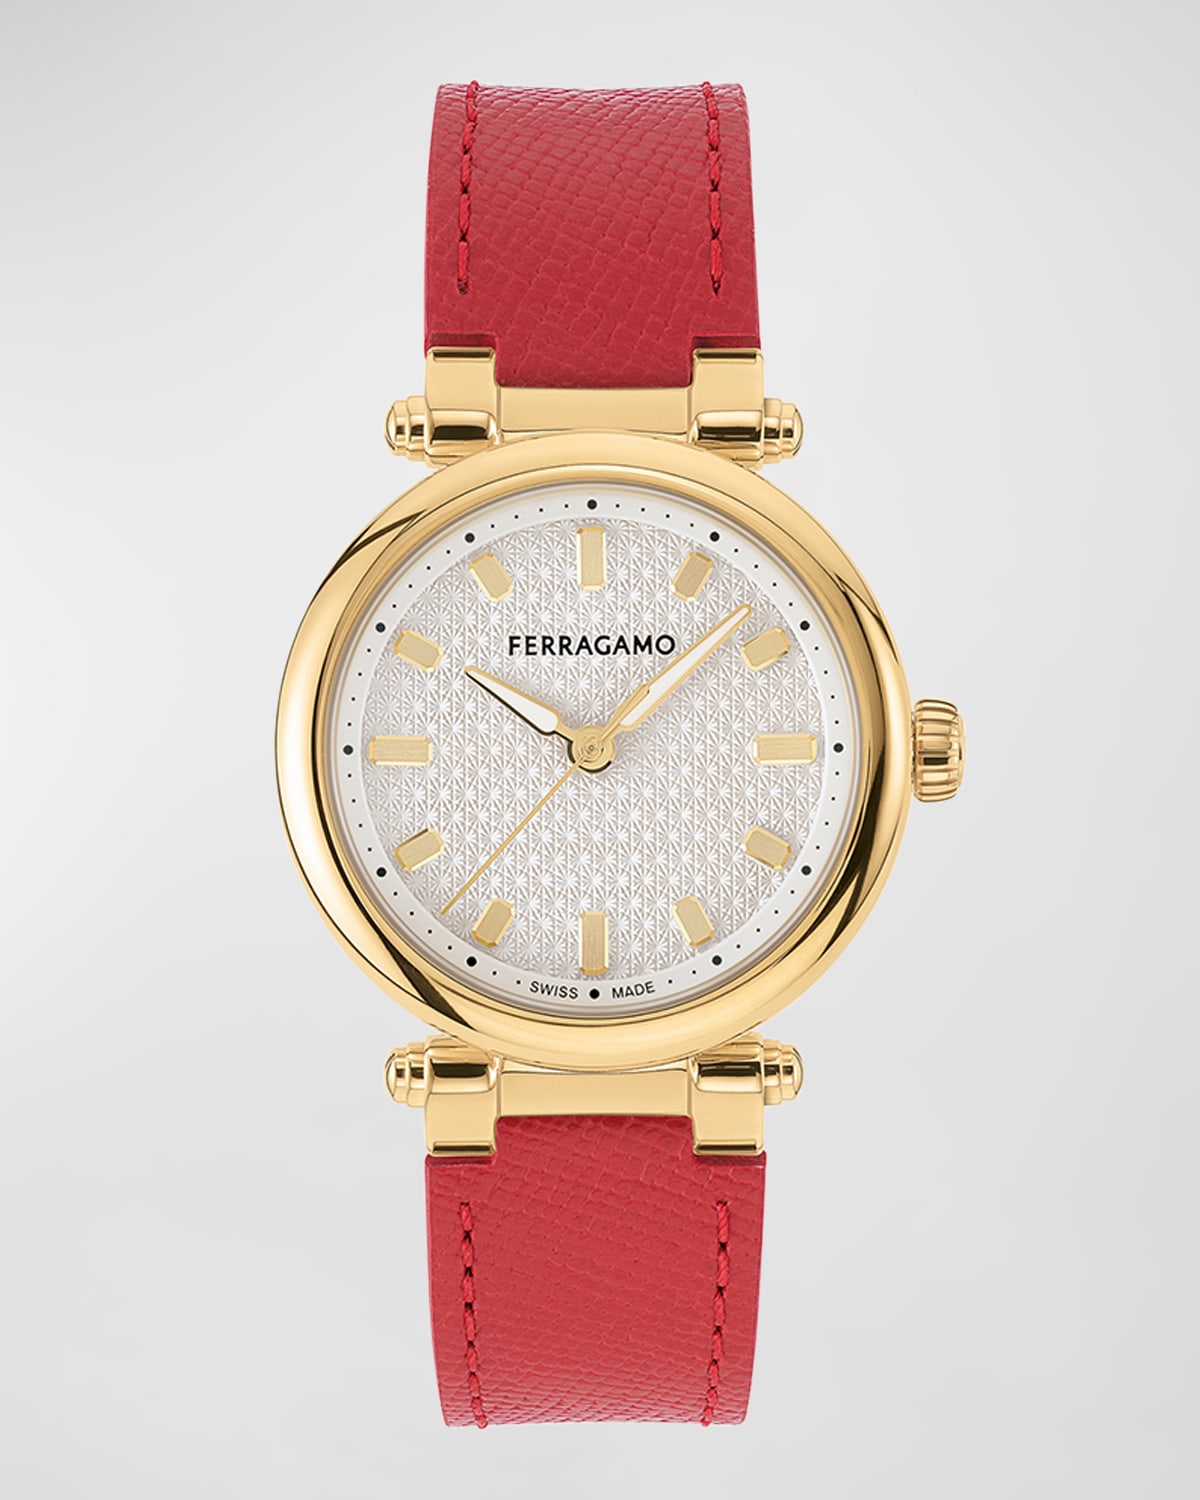 30mm Ferragamo Softy Watch with Calf Leather Strap, Red